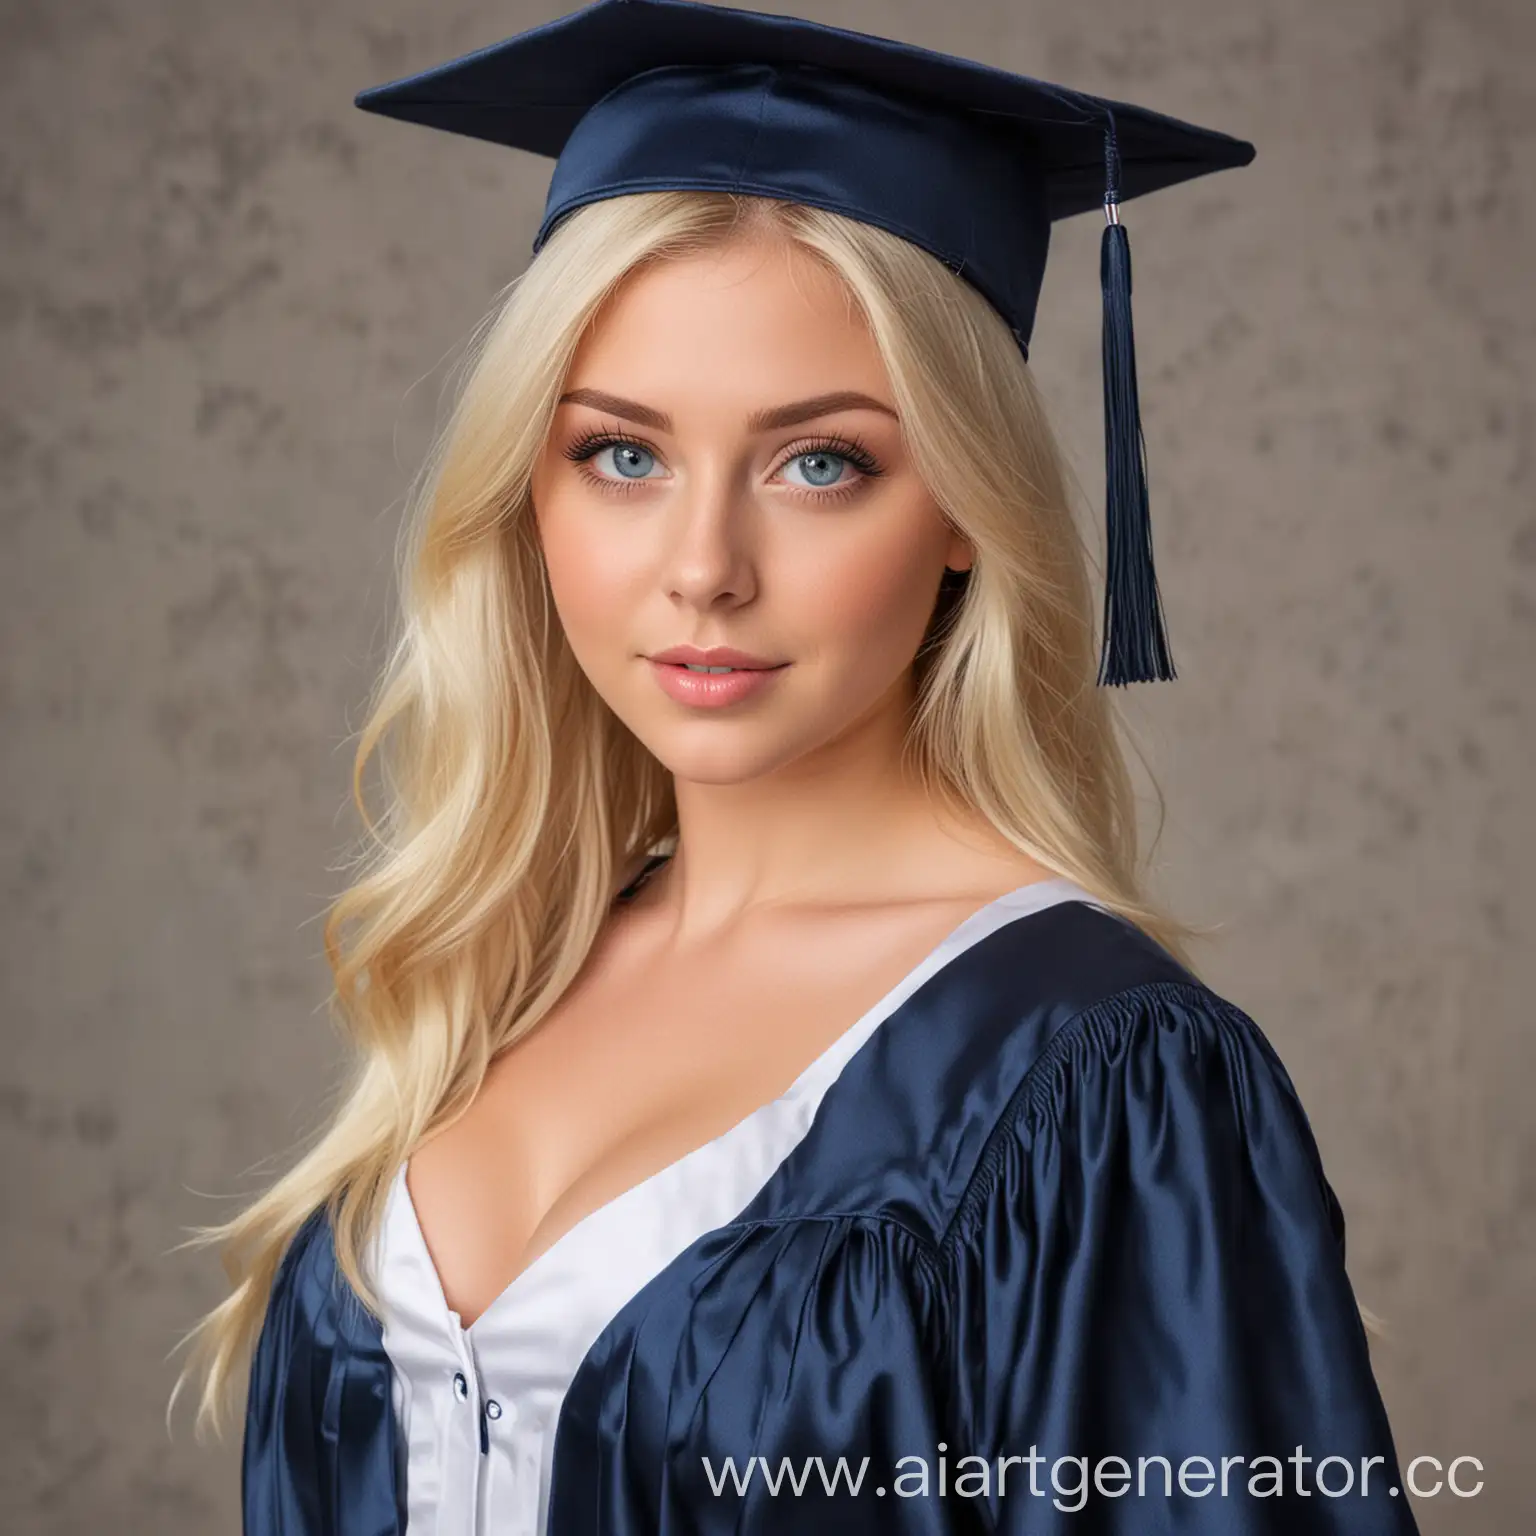 busty girl with blonde hair and blue eyes wearing a graduation outfit and hat. emphasis on her ample breasts.